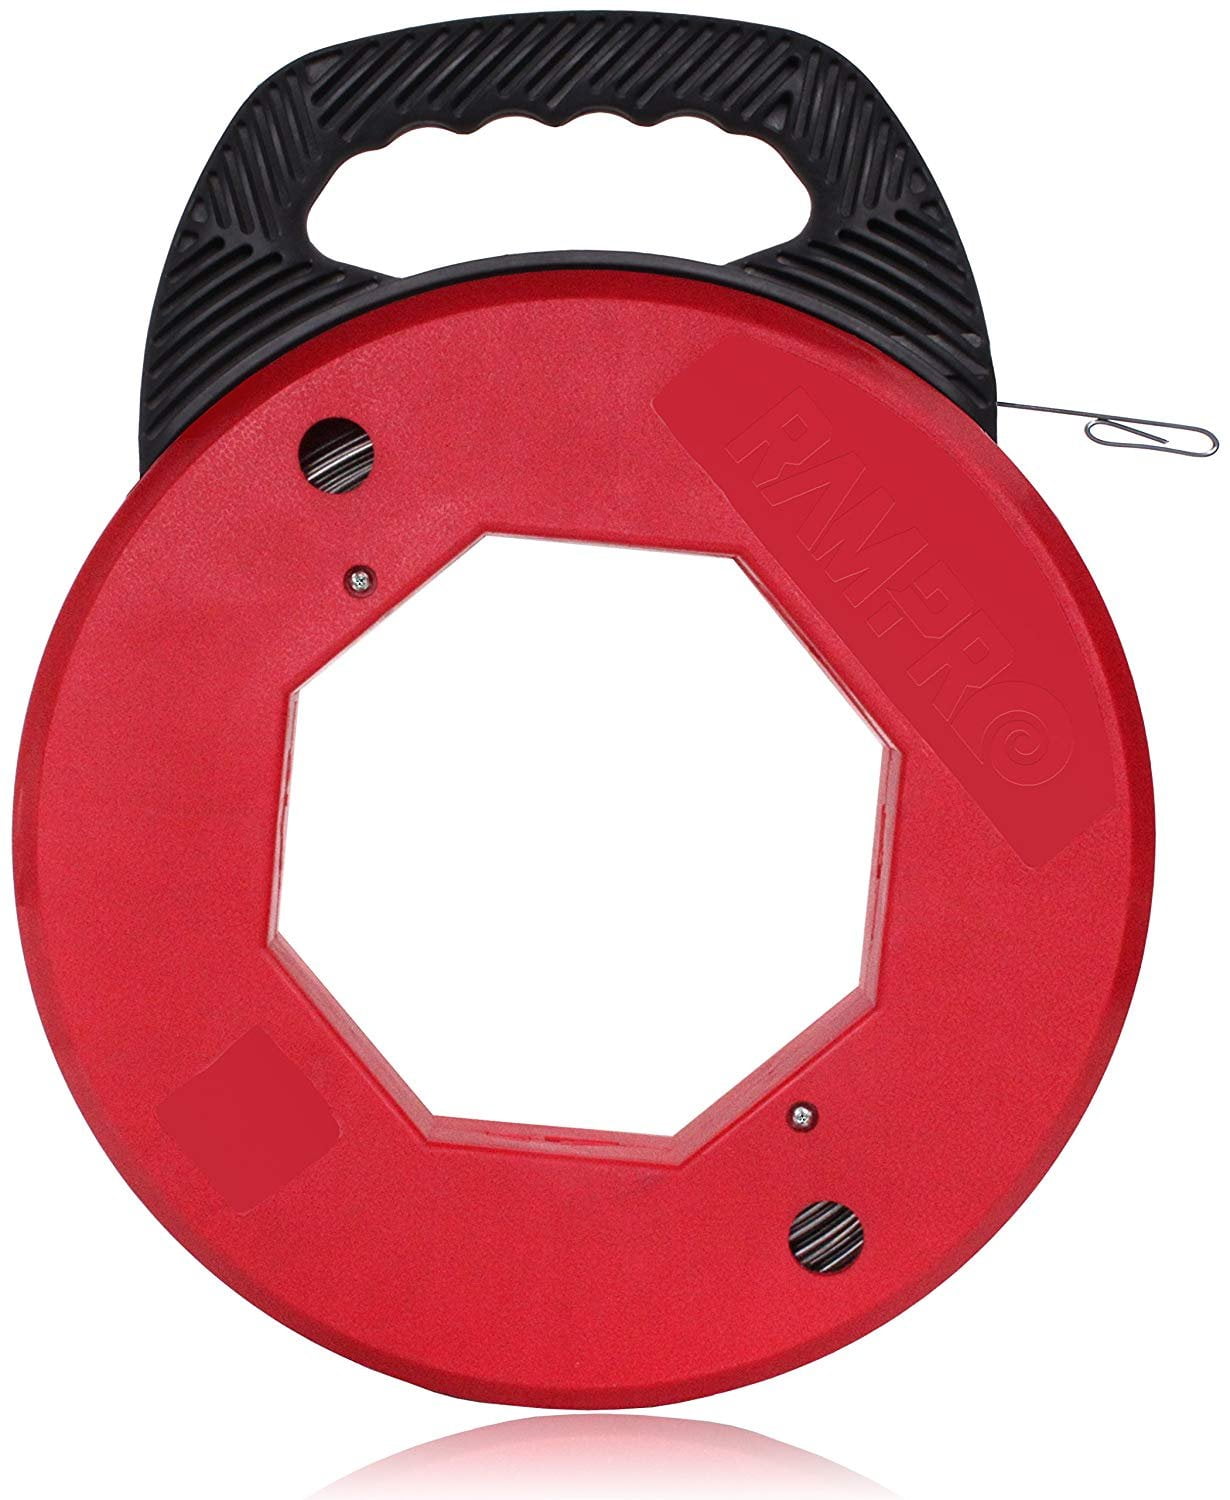 200 Foot Reach with High Impact Case Spring-Steel Fish Tape Reel for Electric 